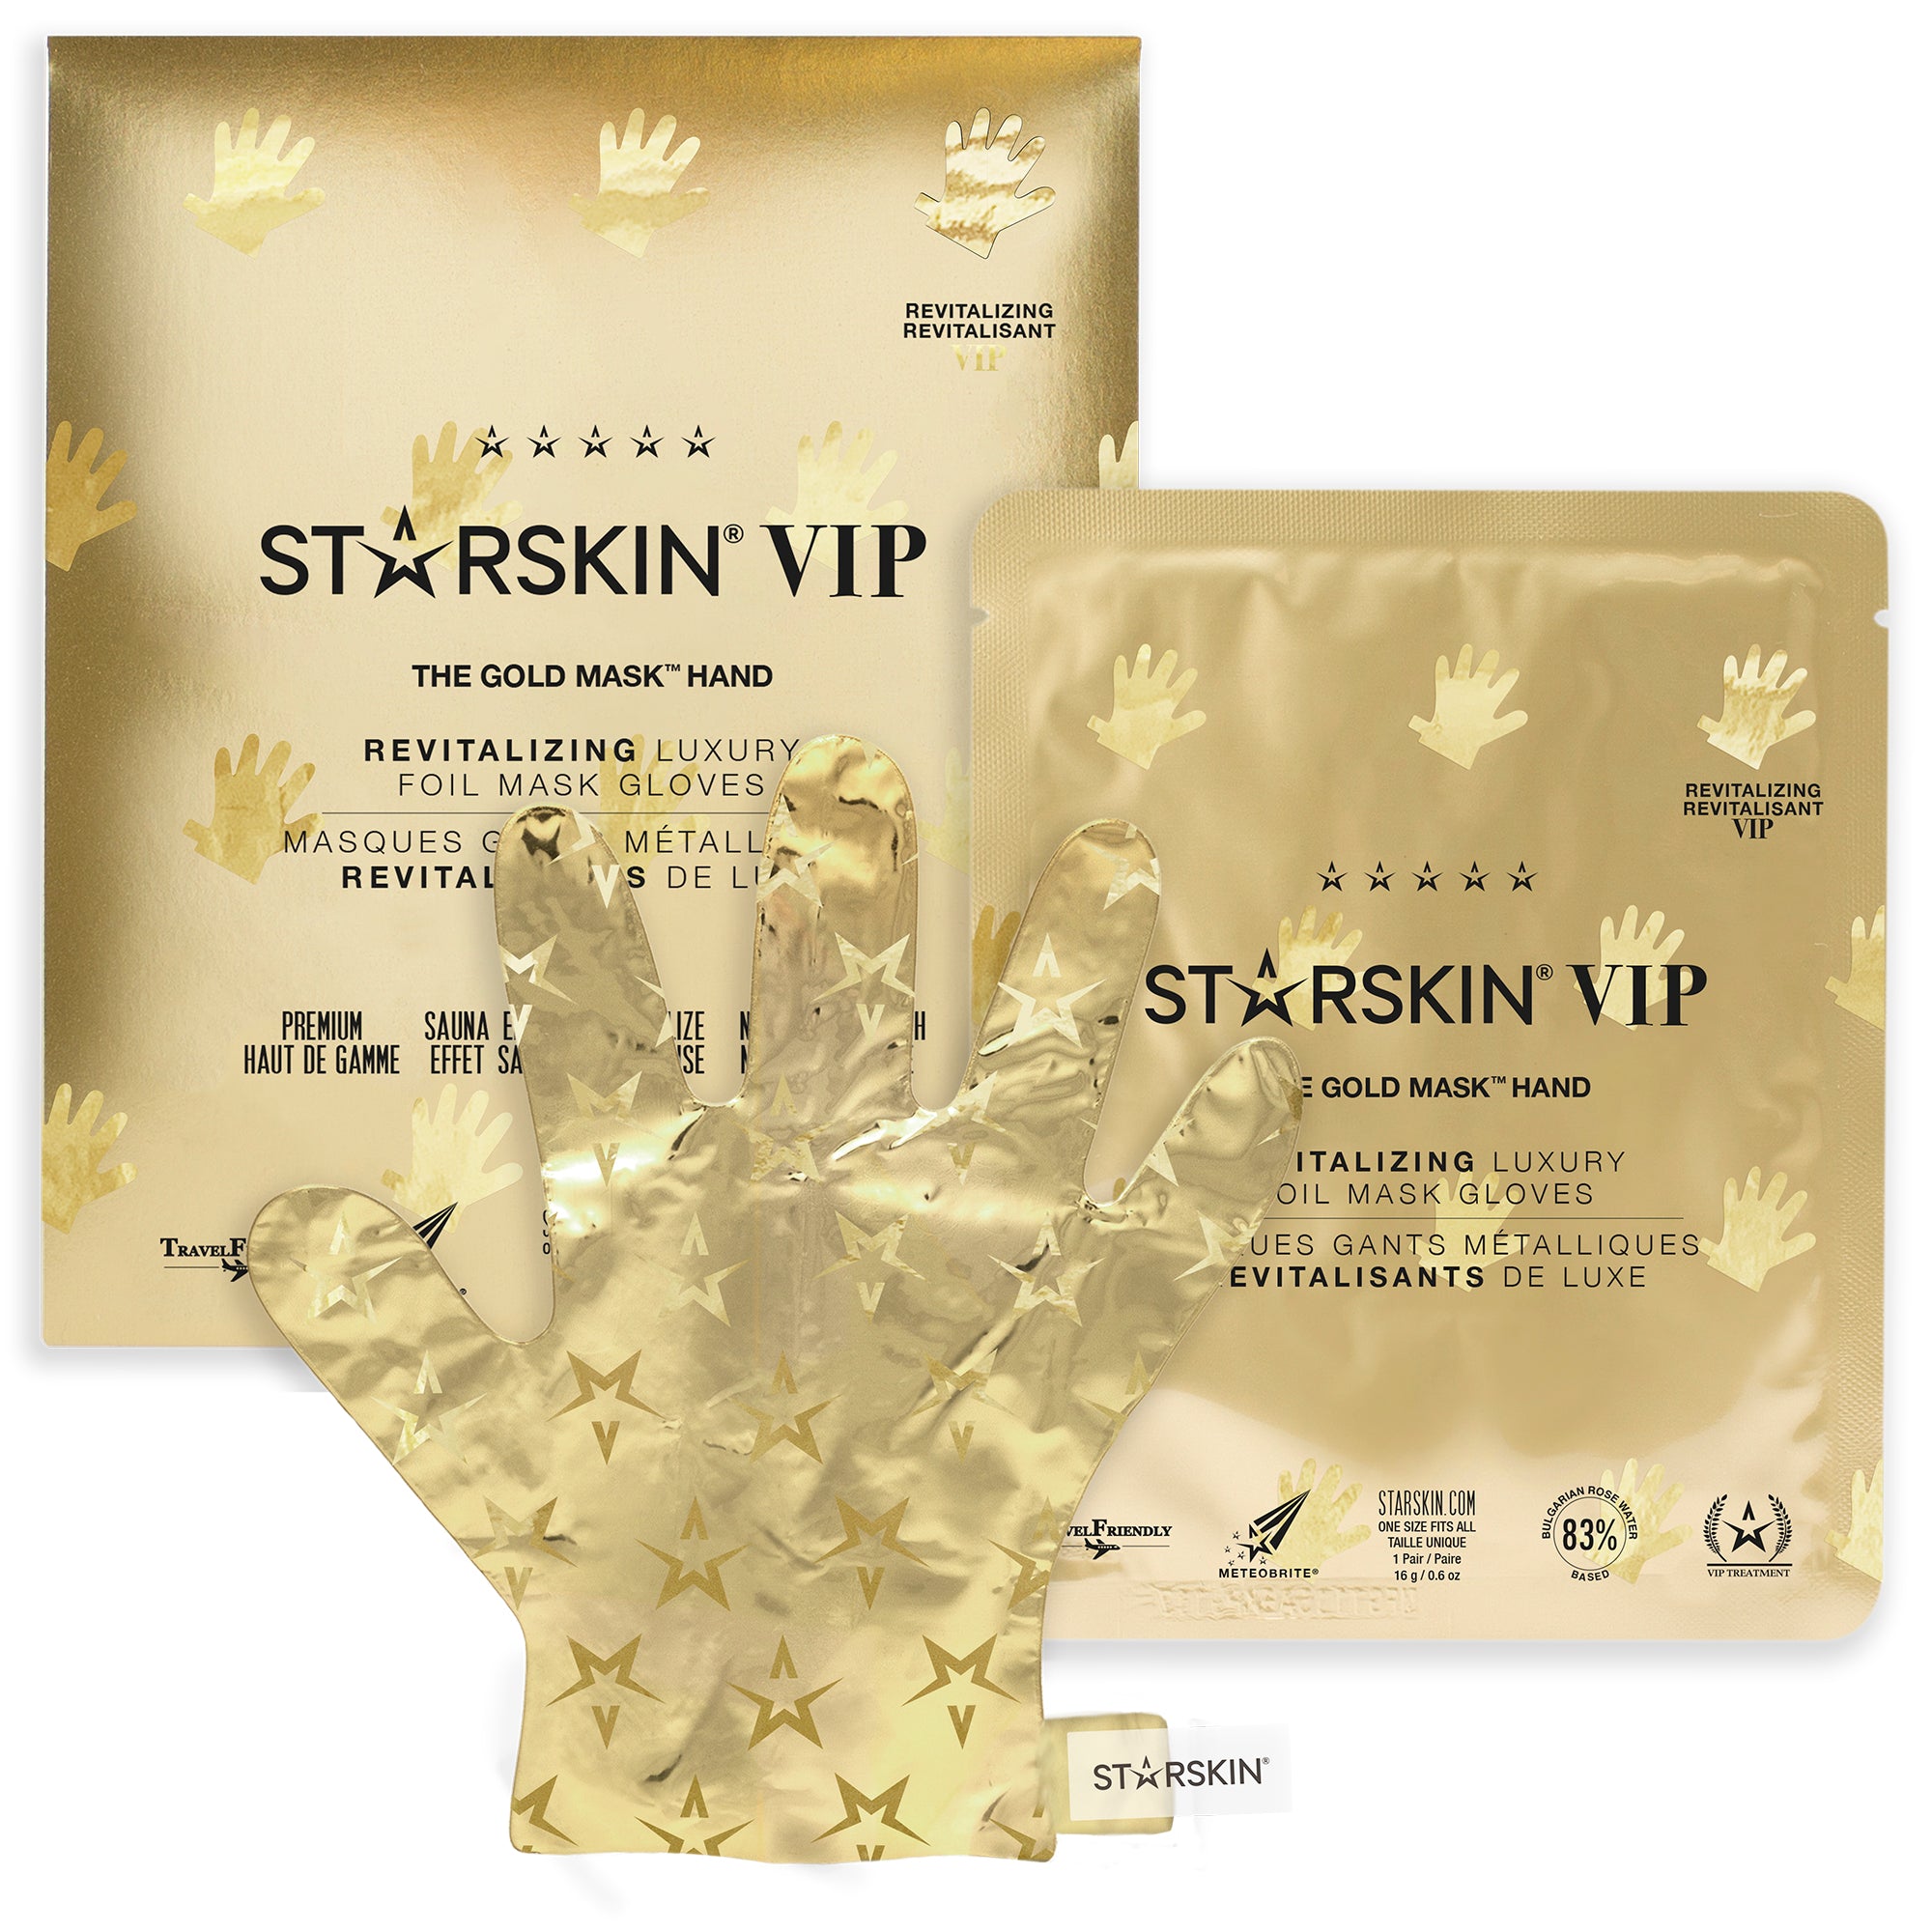 The VIP Gold Mask Hand from Starskin being showcased